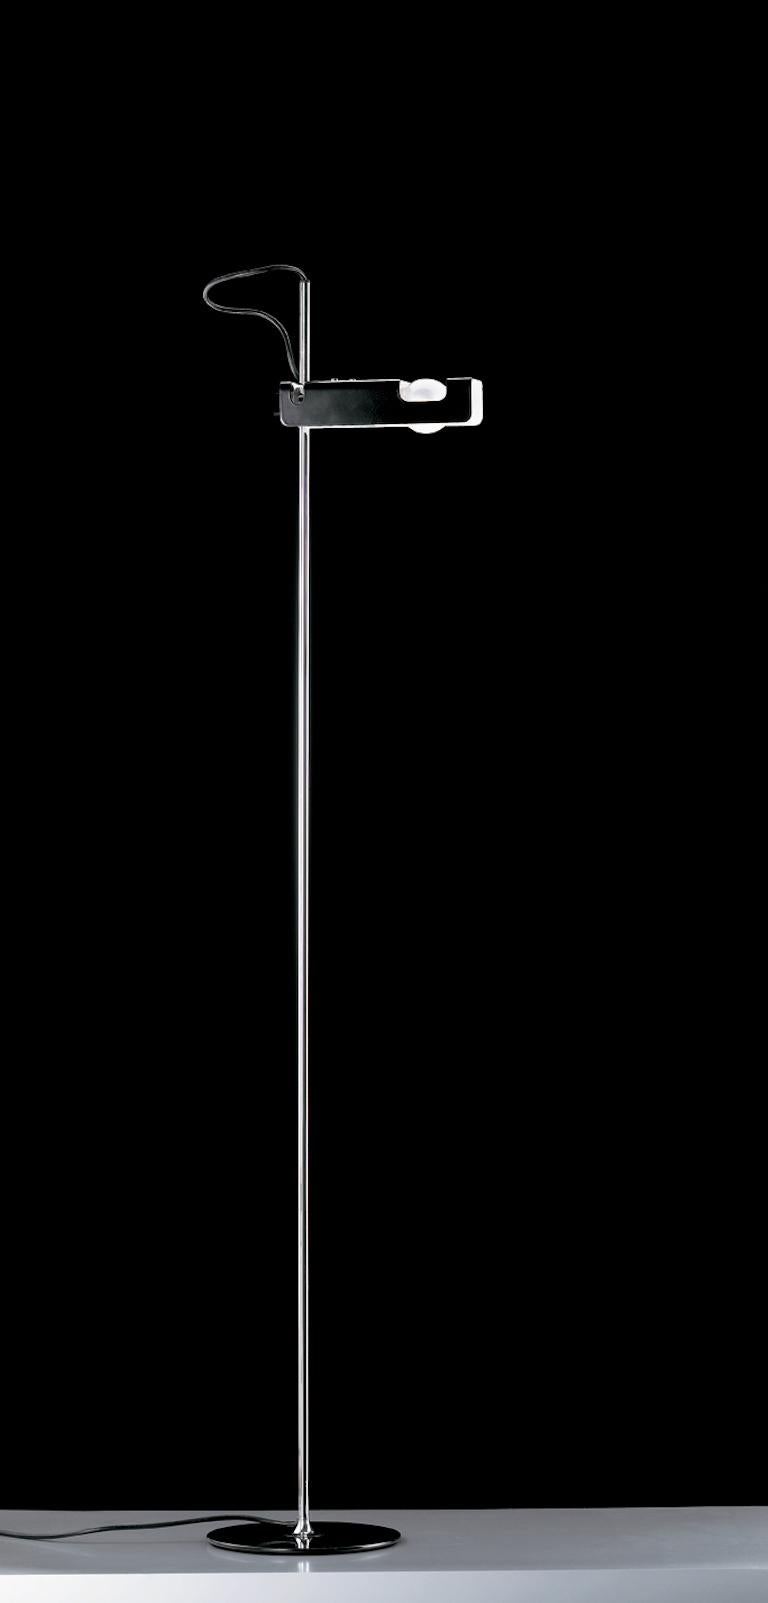 Floor lamp giving direct light. Lacquered metal base, chromium-plated stem, adjustable reflector in lacquered aluminum. Current production originally designed by Joe Colombo for O-Luce in 1965. The Spider won the Compasso d'Oro award in 1967 and is